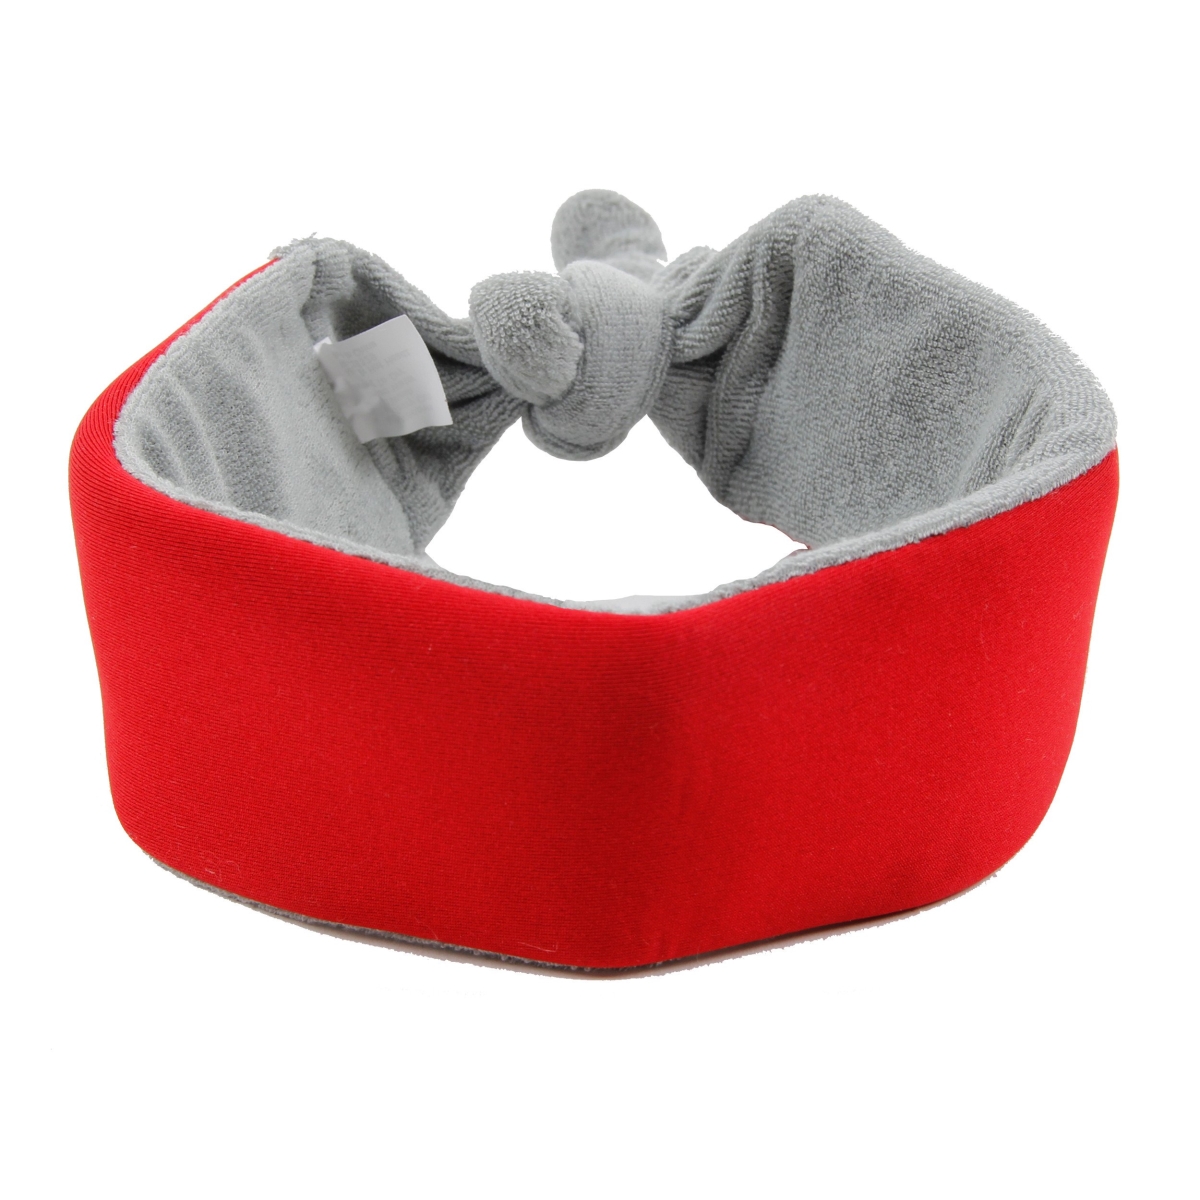 Picture of Pet Life PTCL2RD Neo Breeze Flexible Terry Neoprene Dog Neck Wrap, Red - One Size